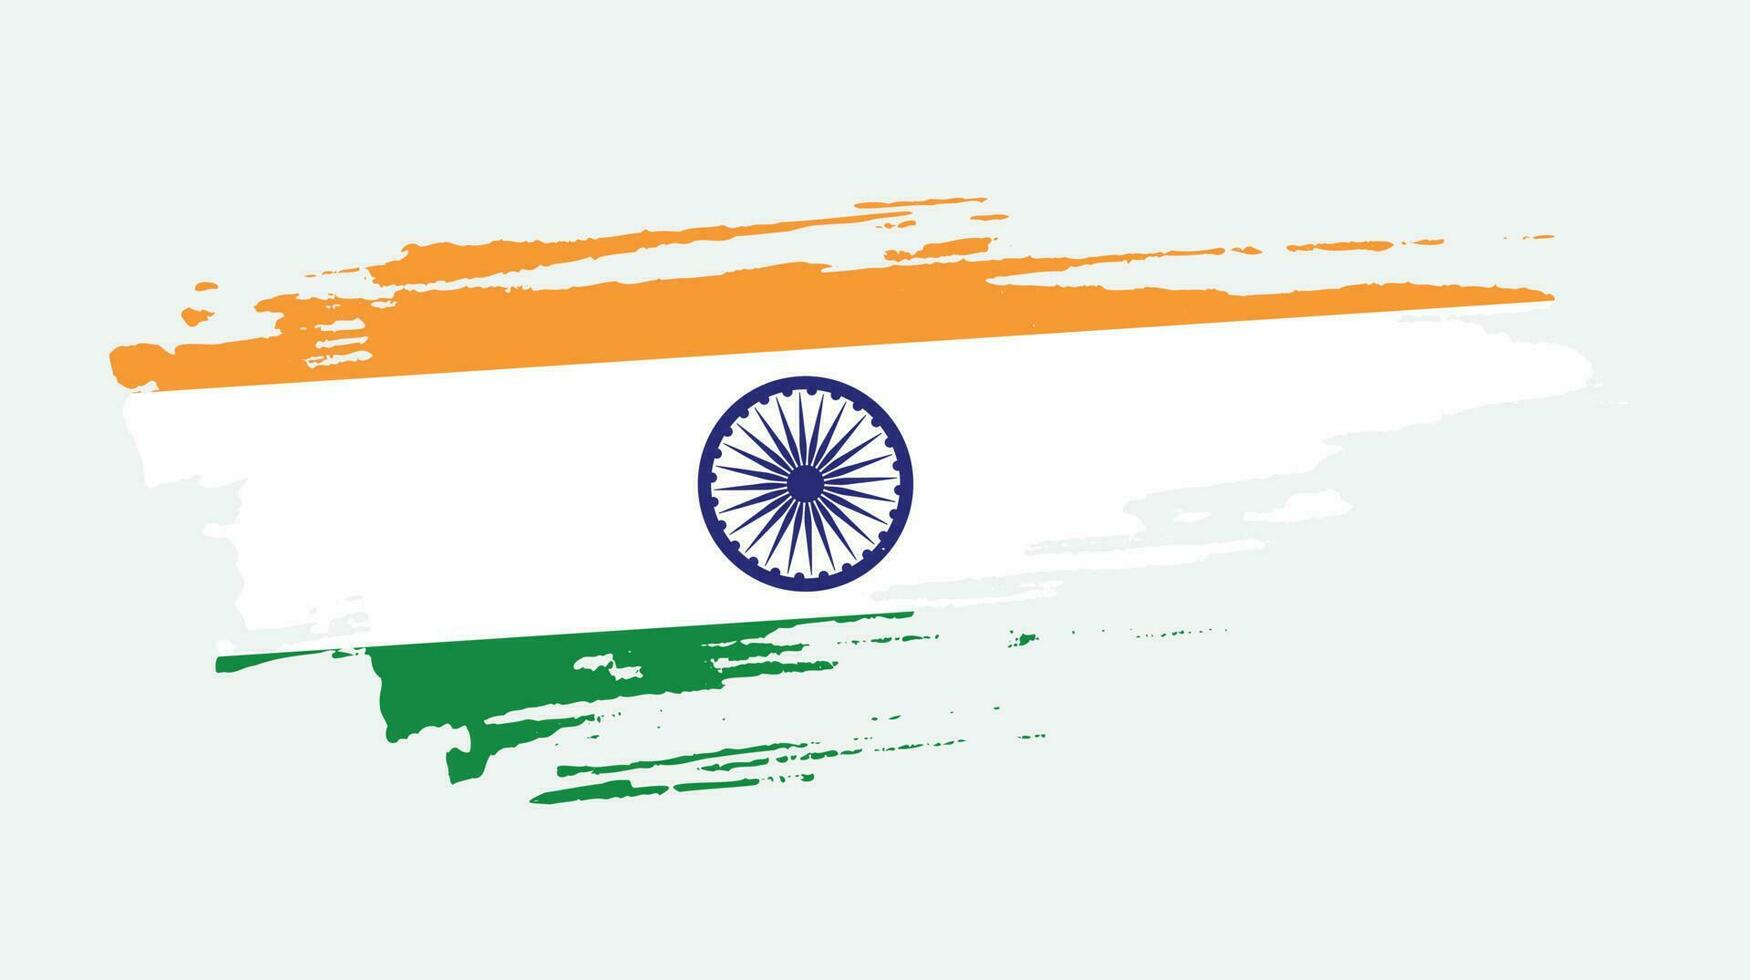 Abstract Indian grunge flag vector